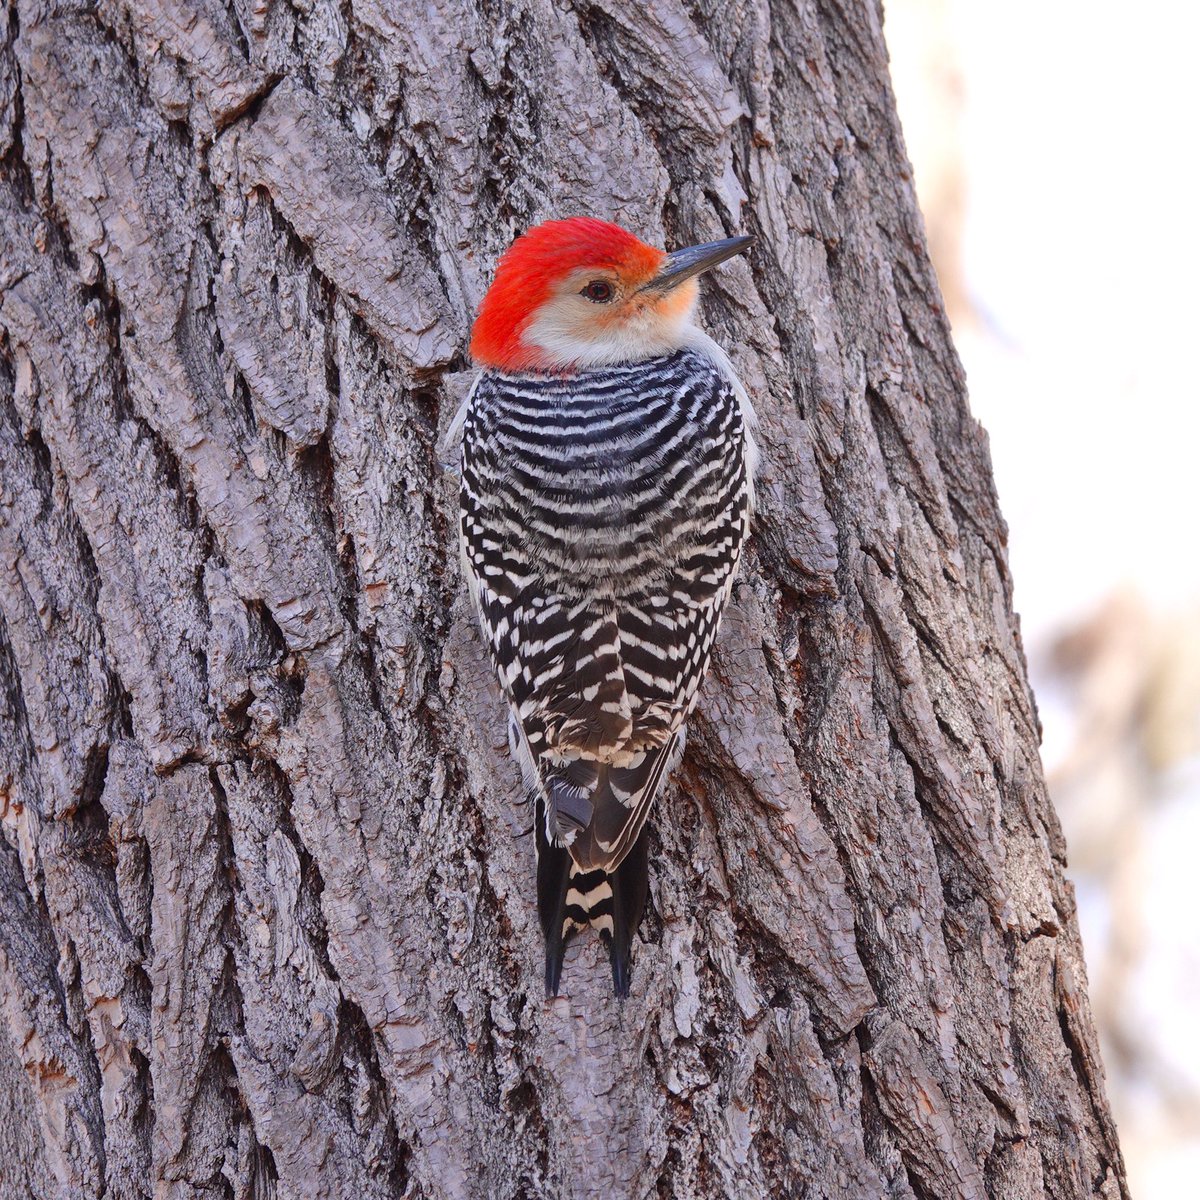 Saw this really bright and beautiful Red-bellied Woodpecker in the Ramble. I love the blush coloring around the bill. #redbelliedwoodpecker #woodpecker #birdphotography #centralparknyc #birdsofnyc #nycbirds #birdphotos #birdcp #birdcpp